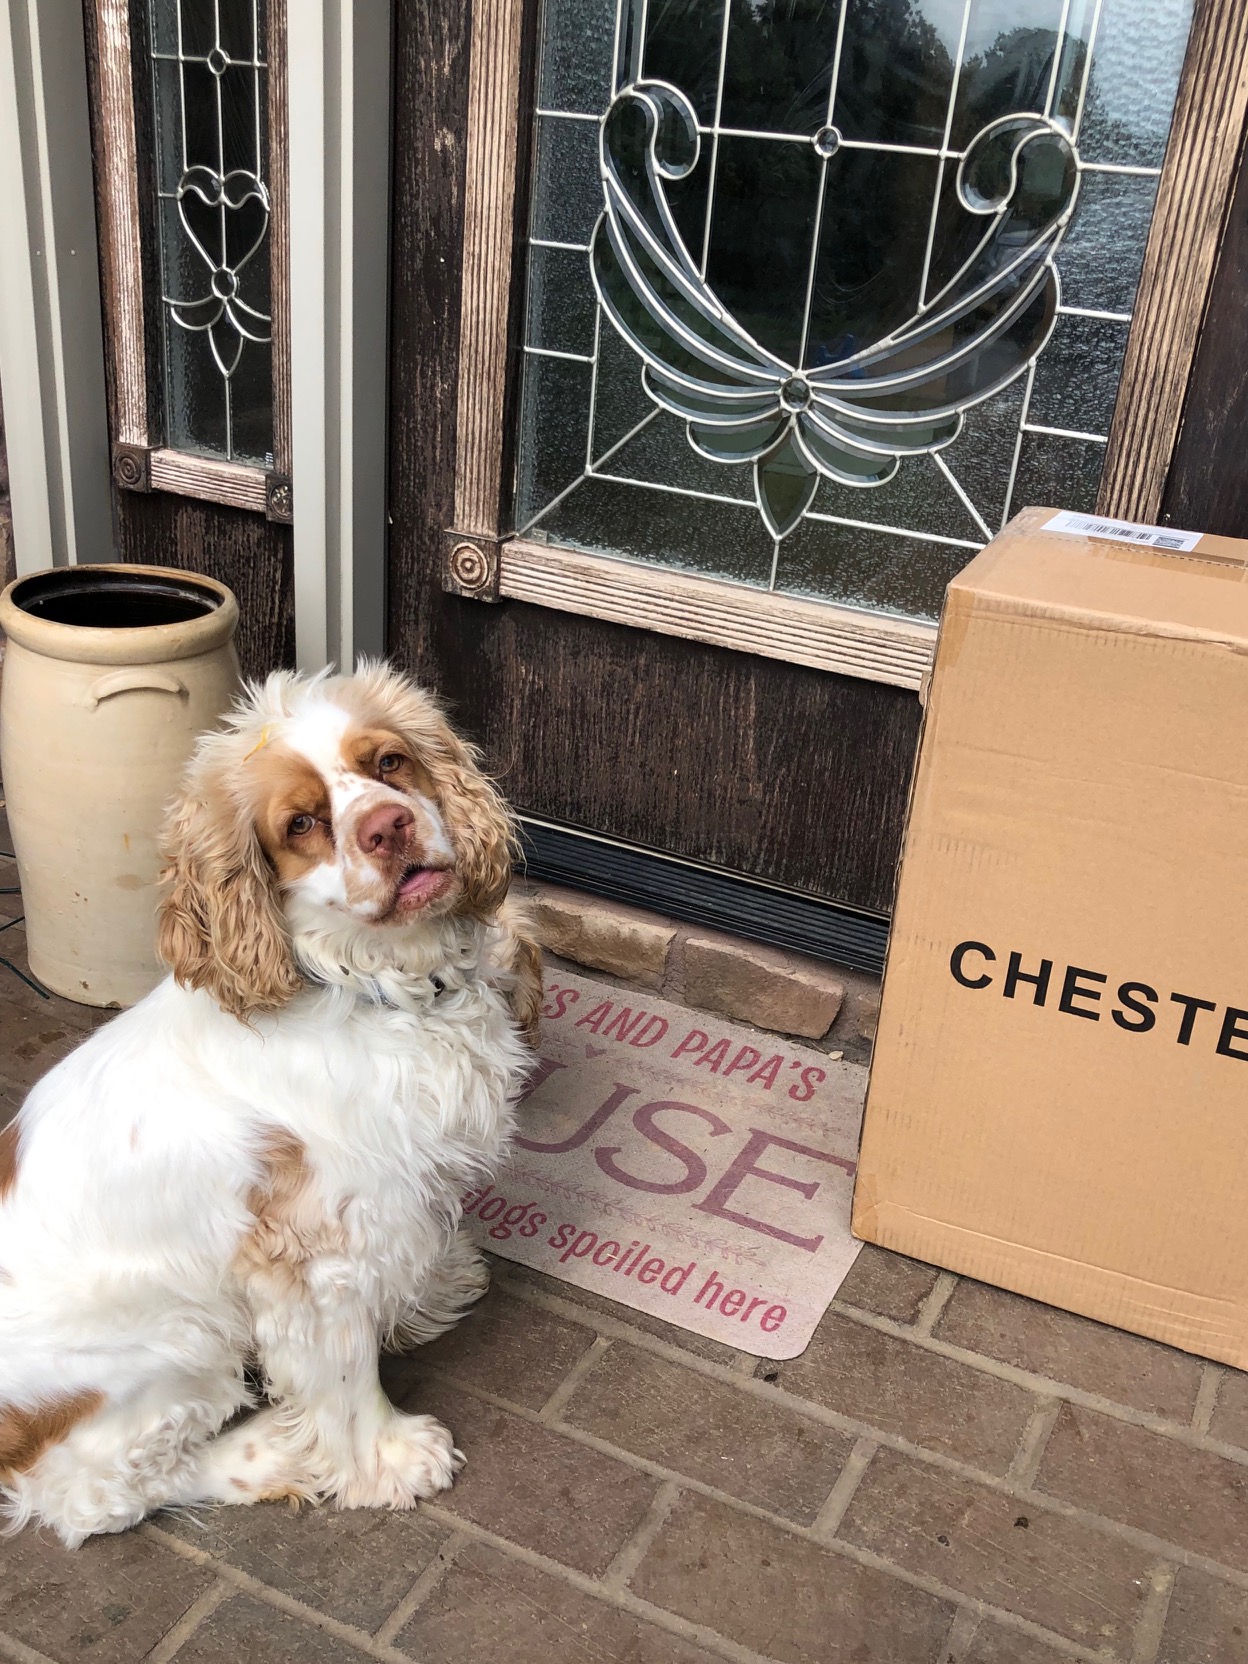 Chester luggage